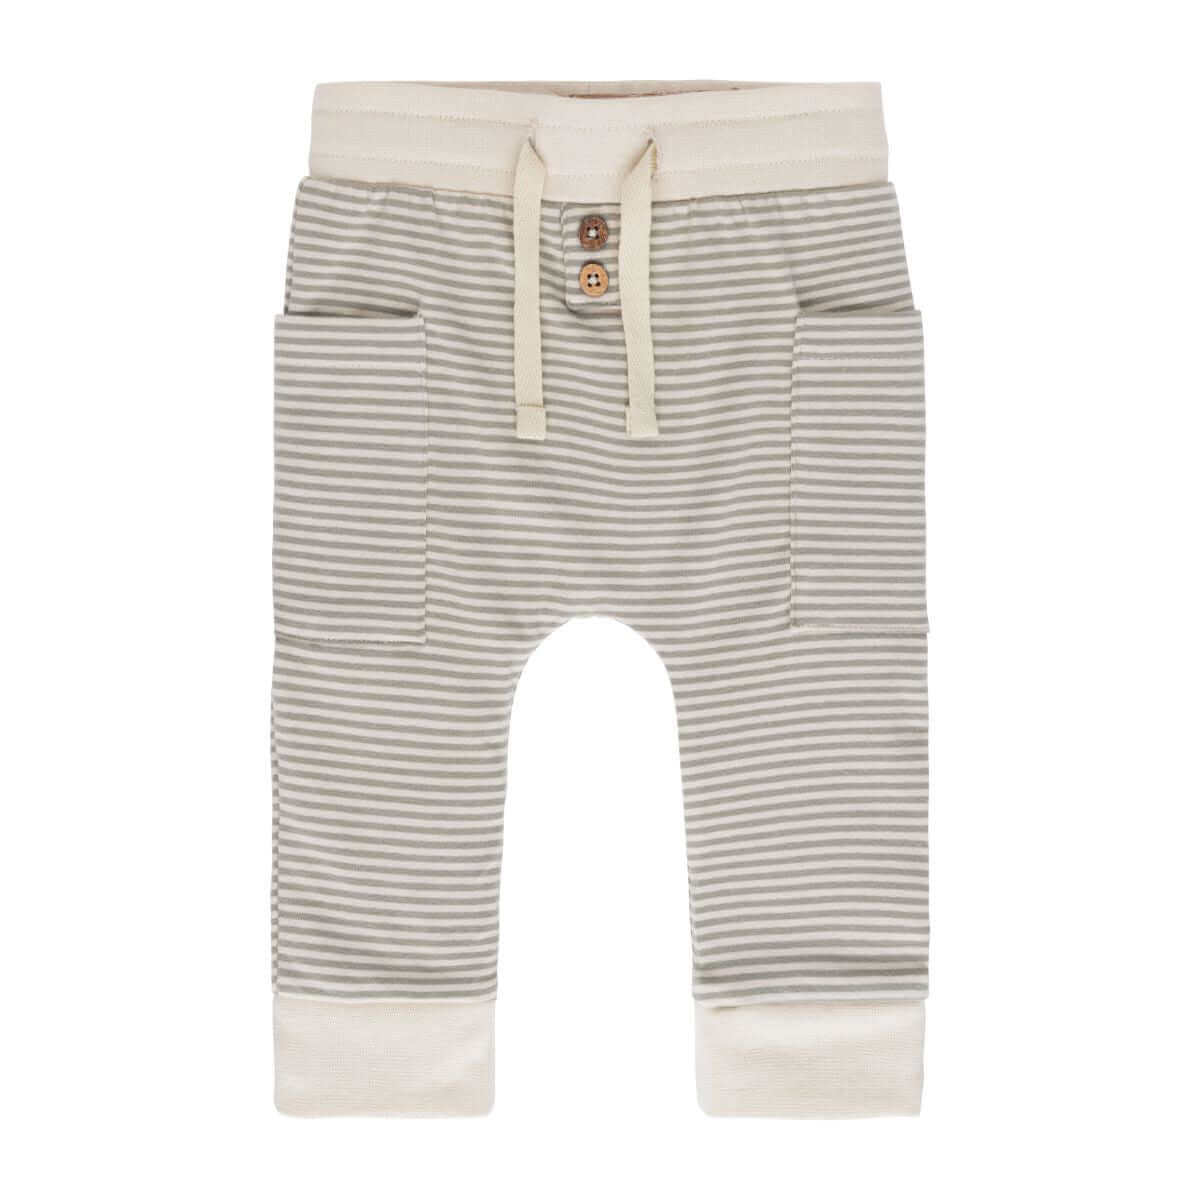 Baby's Only Pants Stripe Urban Green